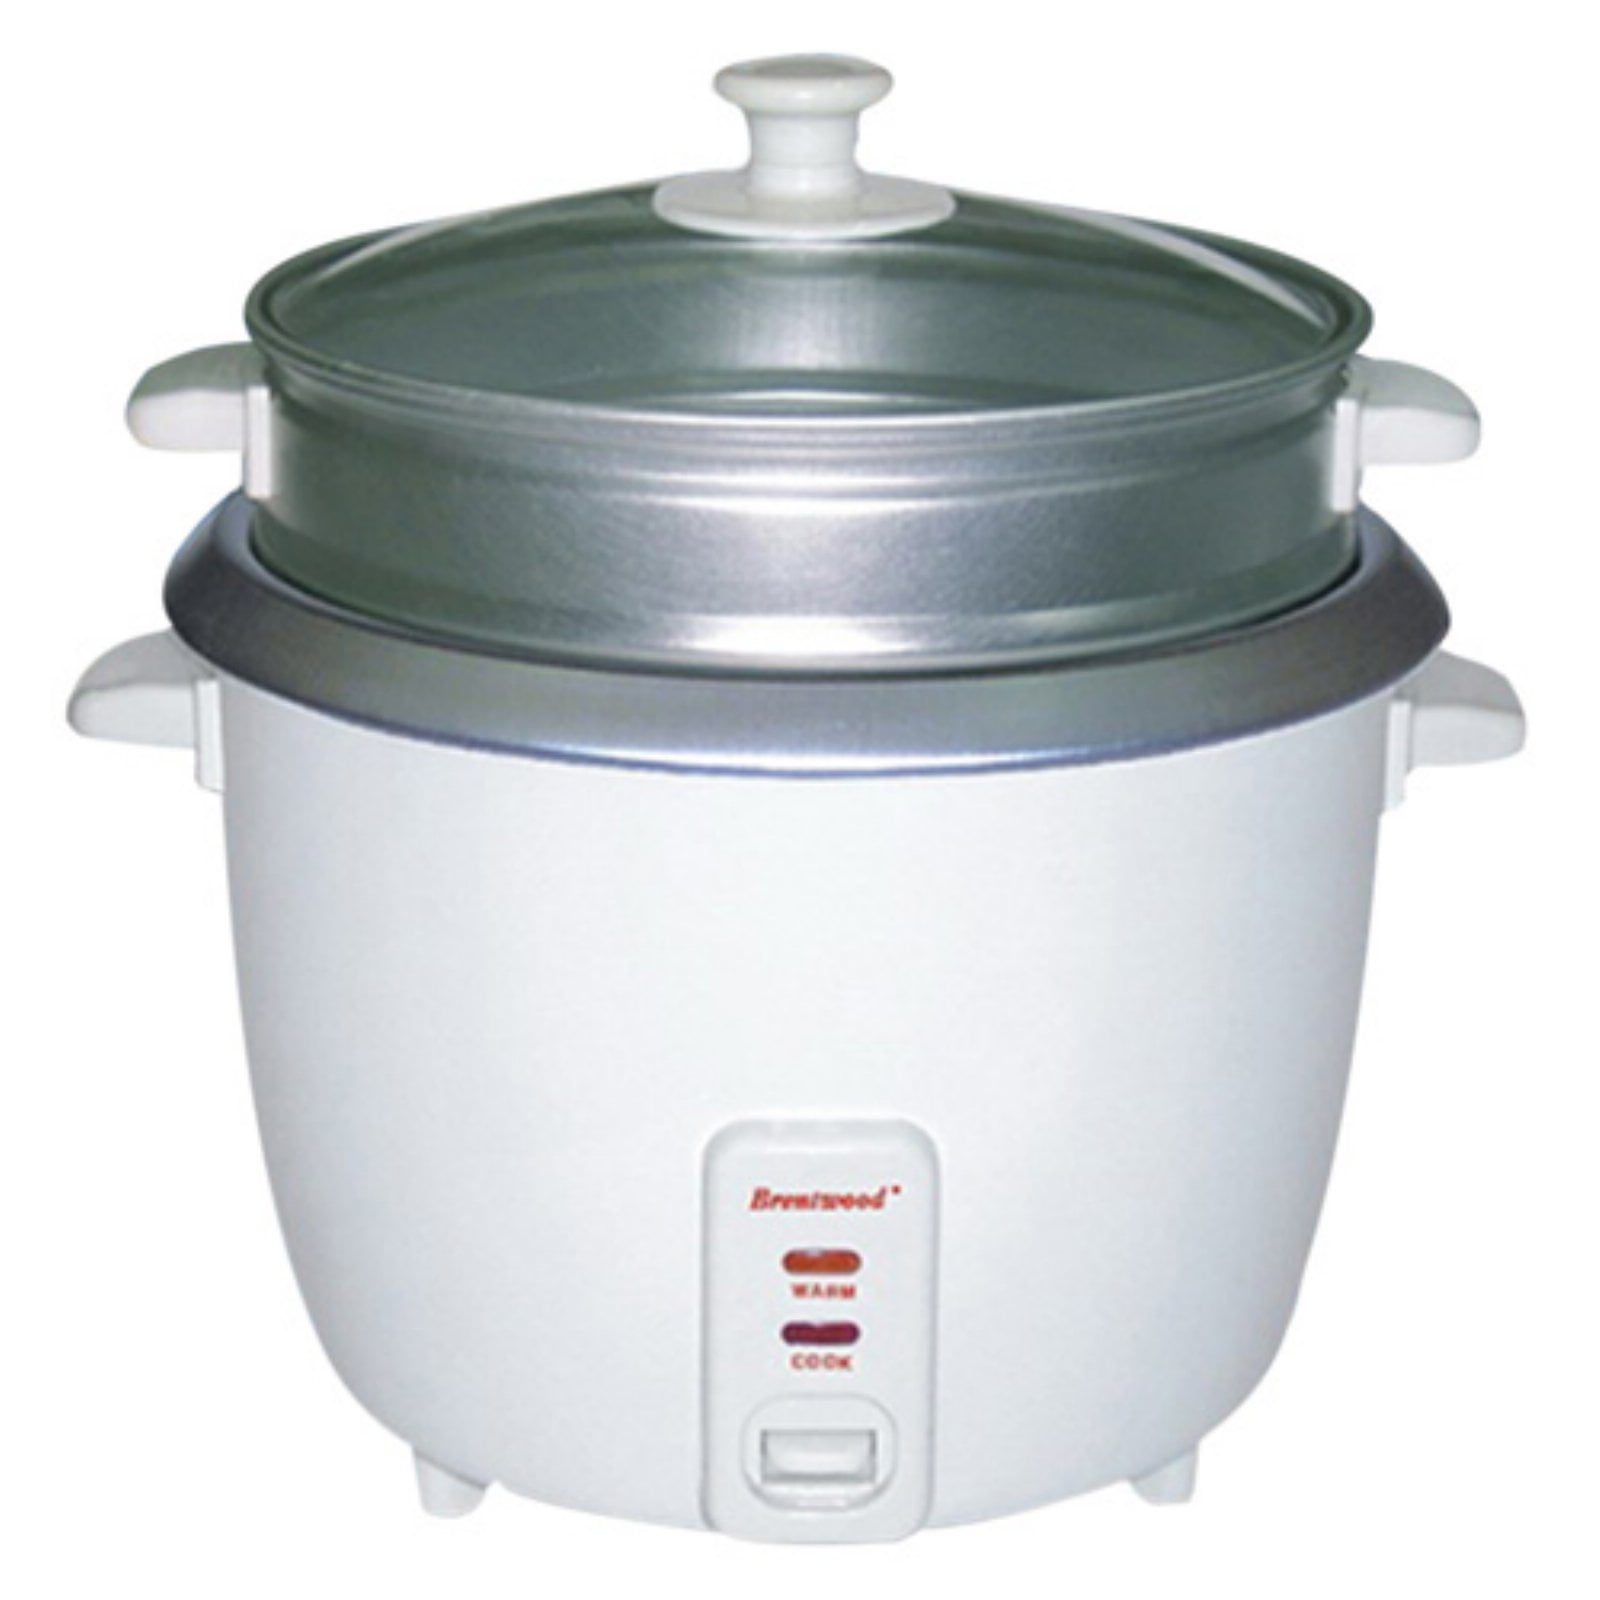 Brentwood 8 Cup Rice Cooker 8 12 x 8 12 White - Office Depot